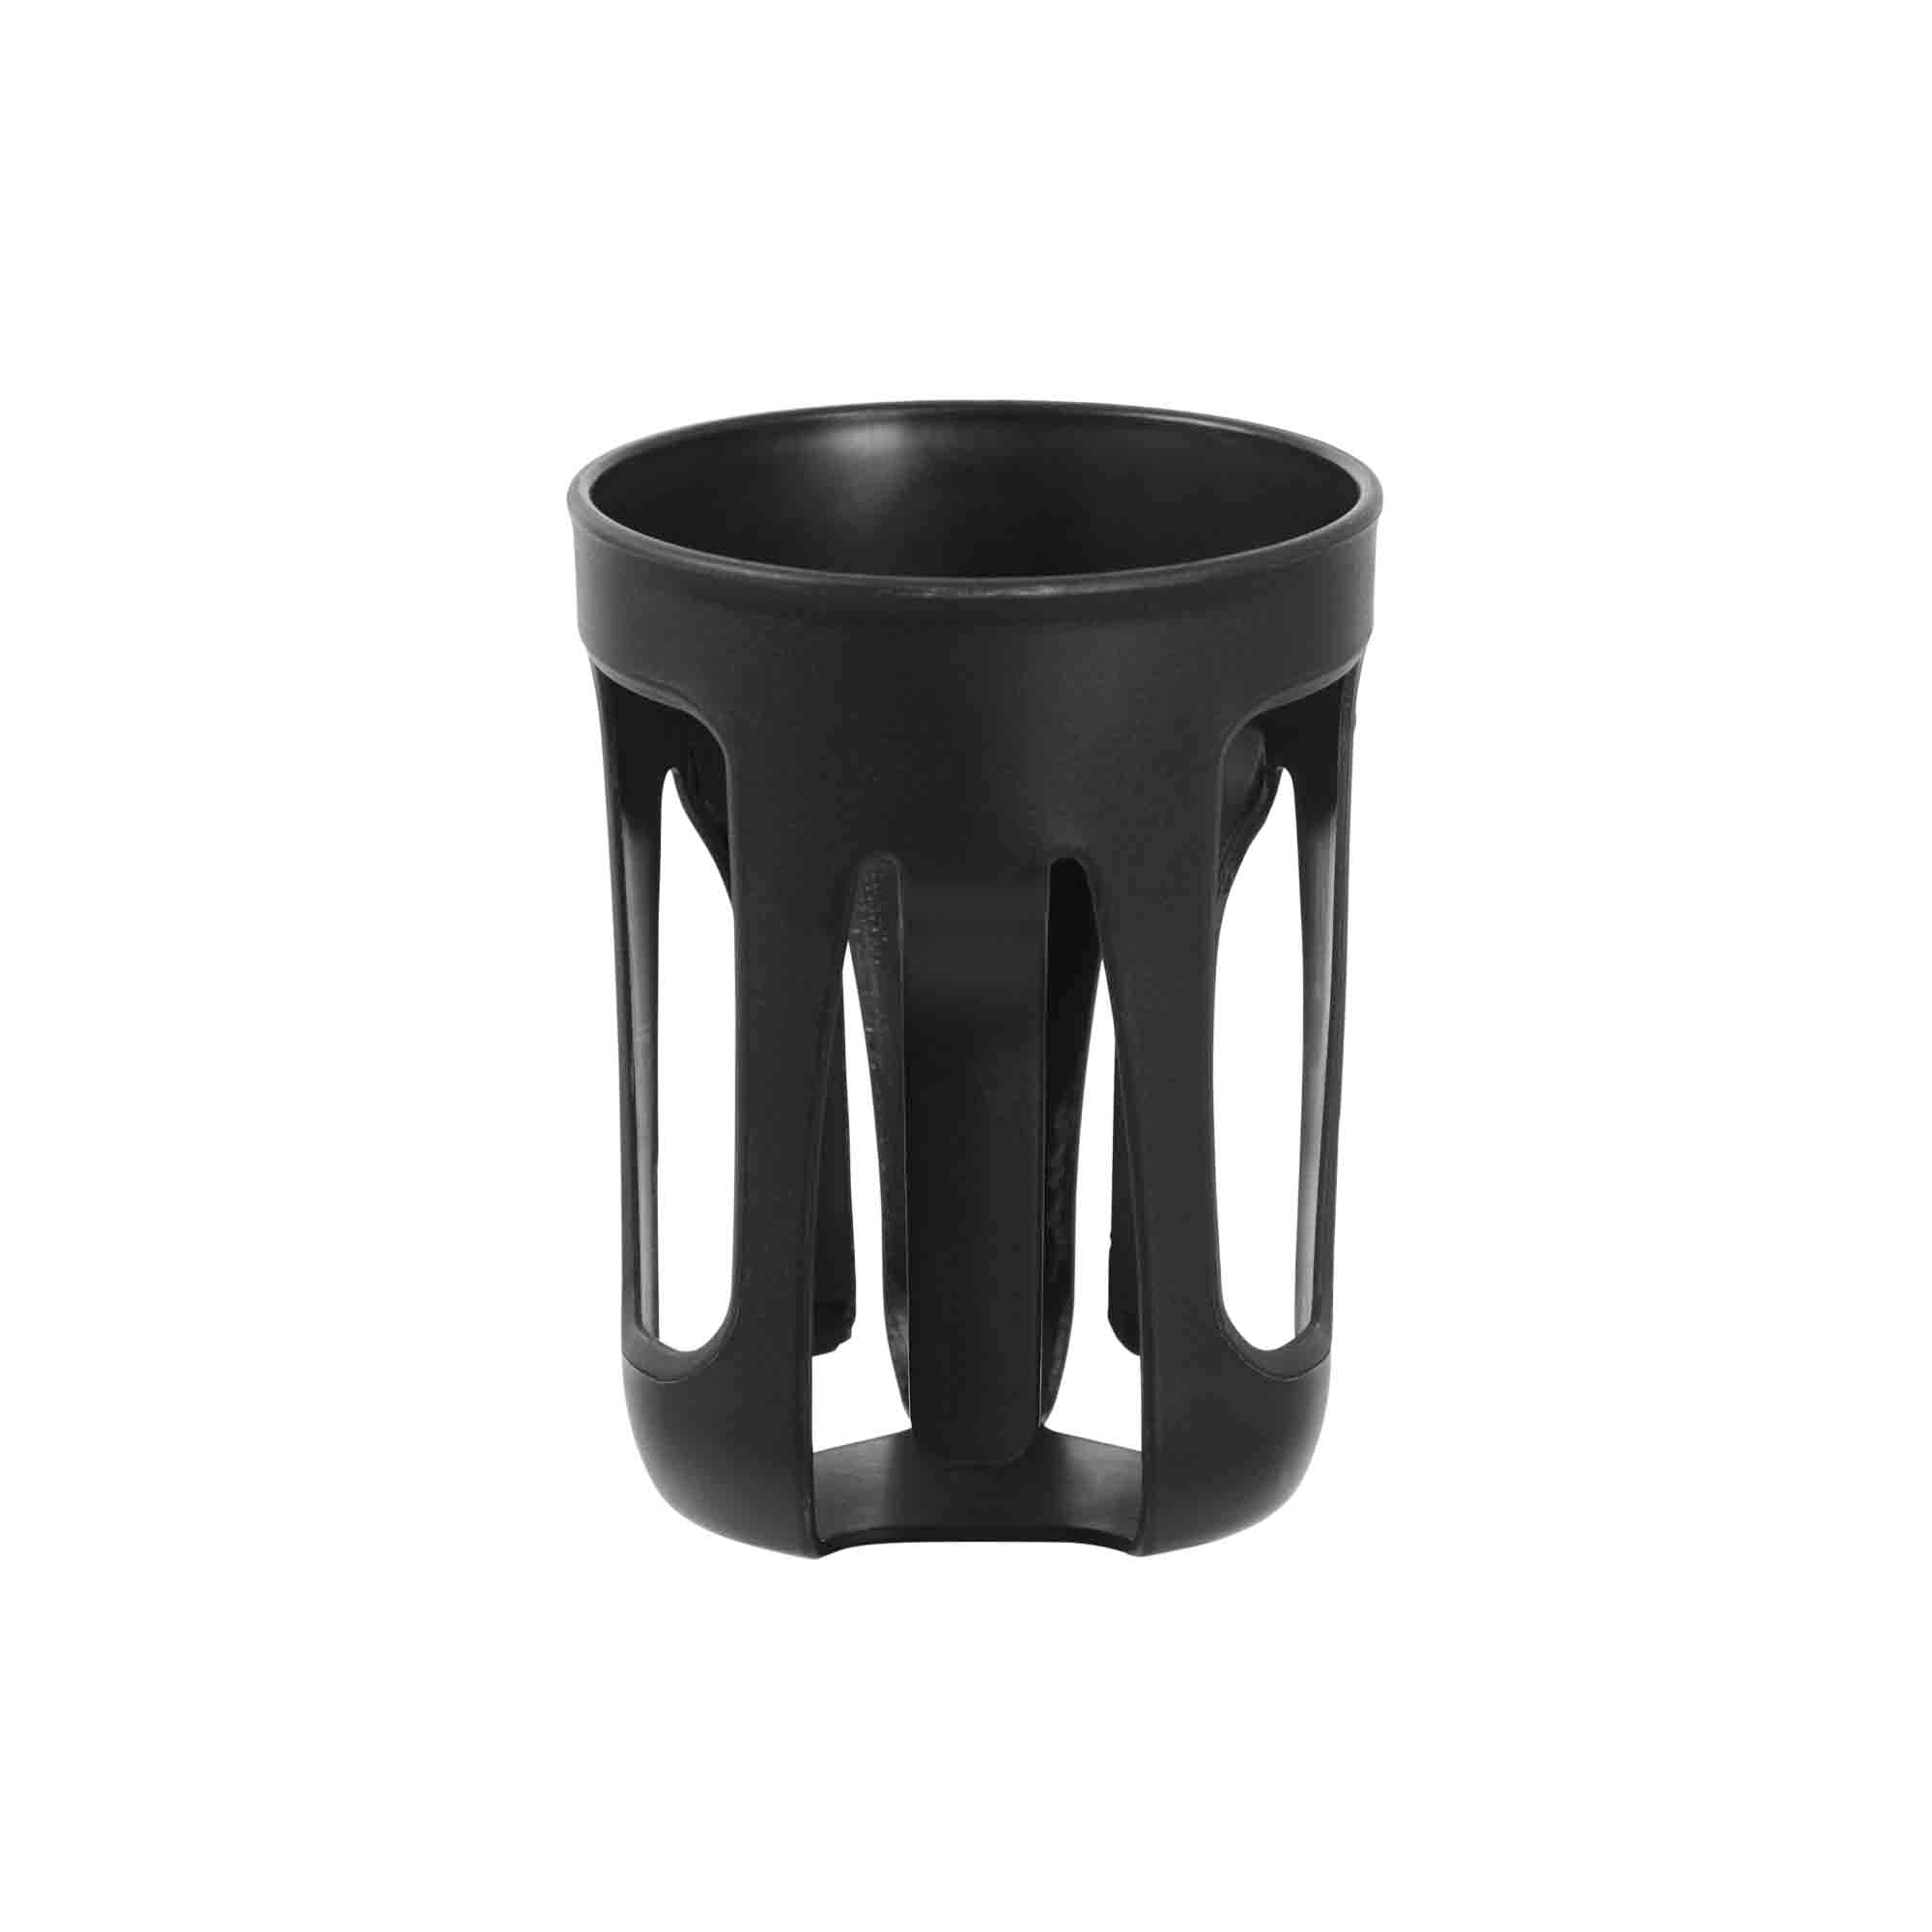 Aries & Stomp Stride Cupholder